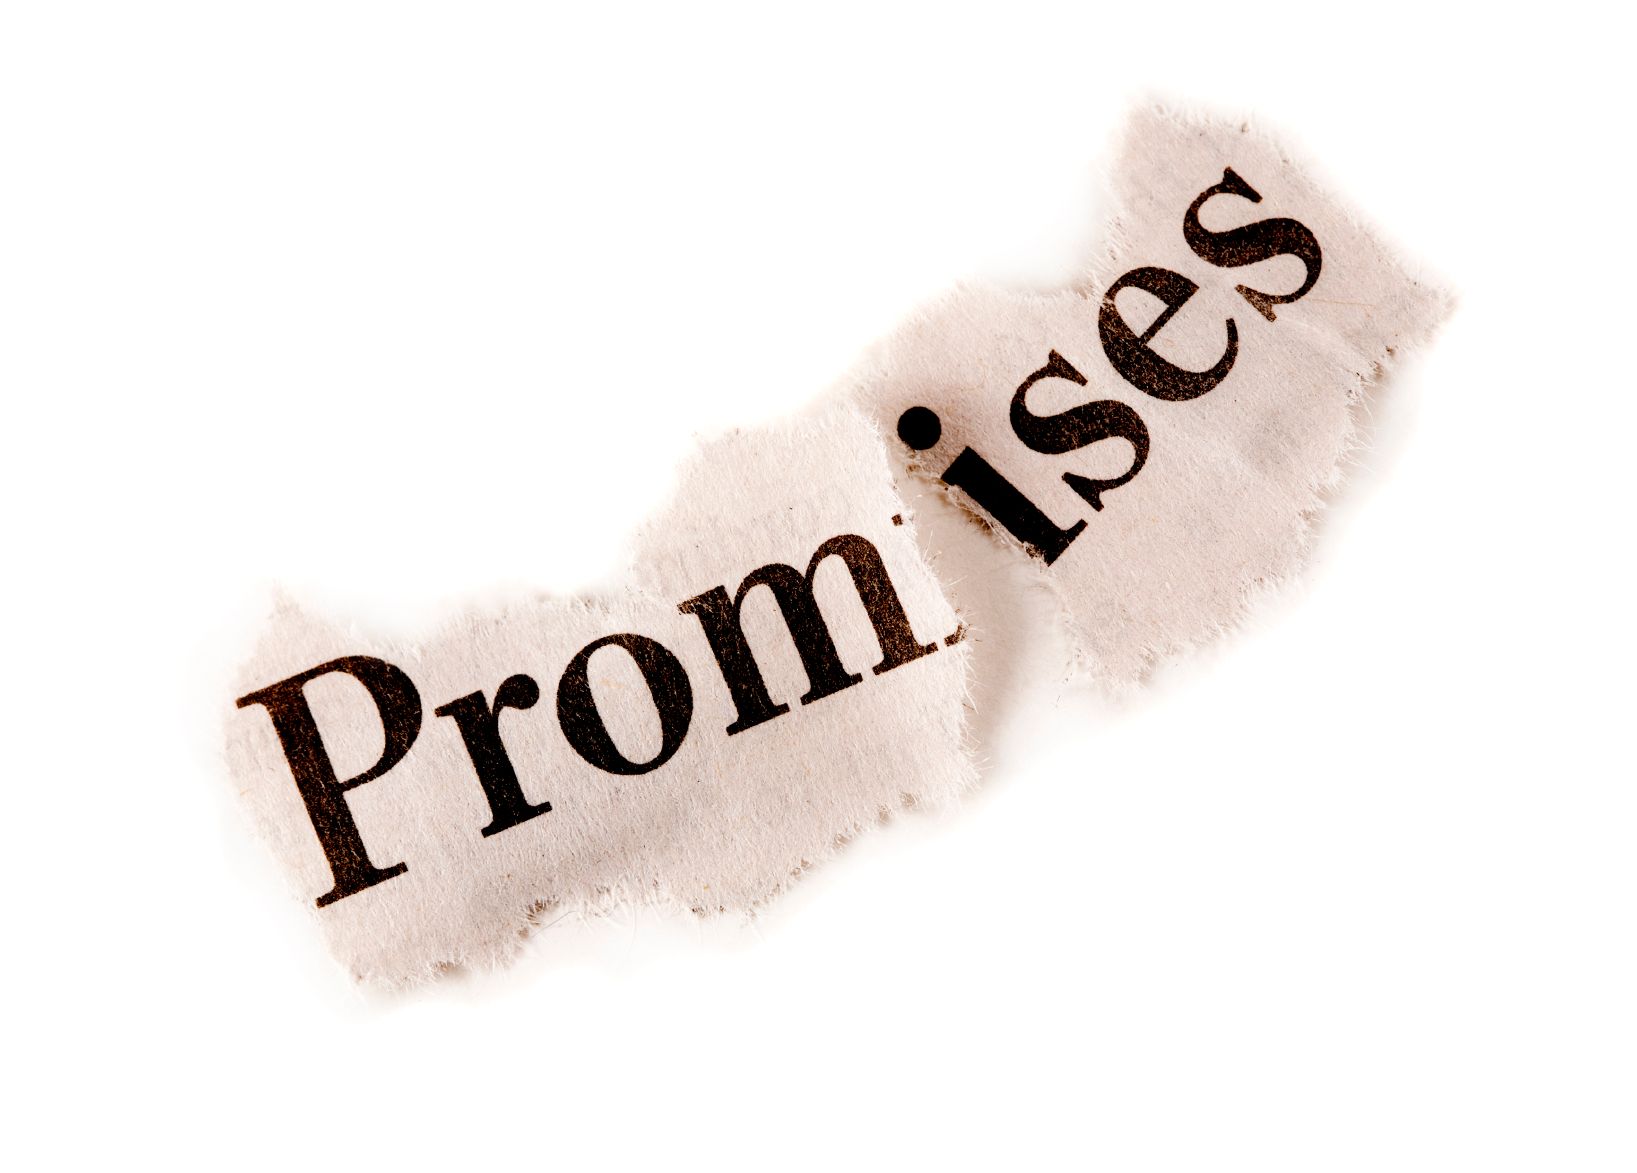 Broken Agreement concept, suitable for many other uses including depression. The word "promise" is torn in two.